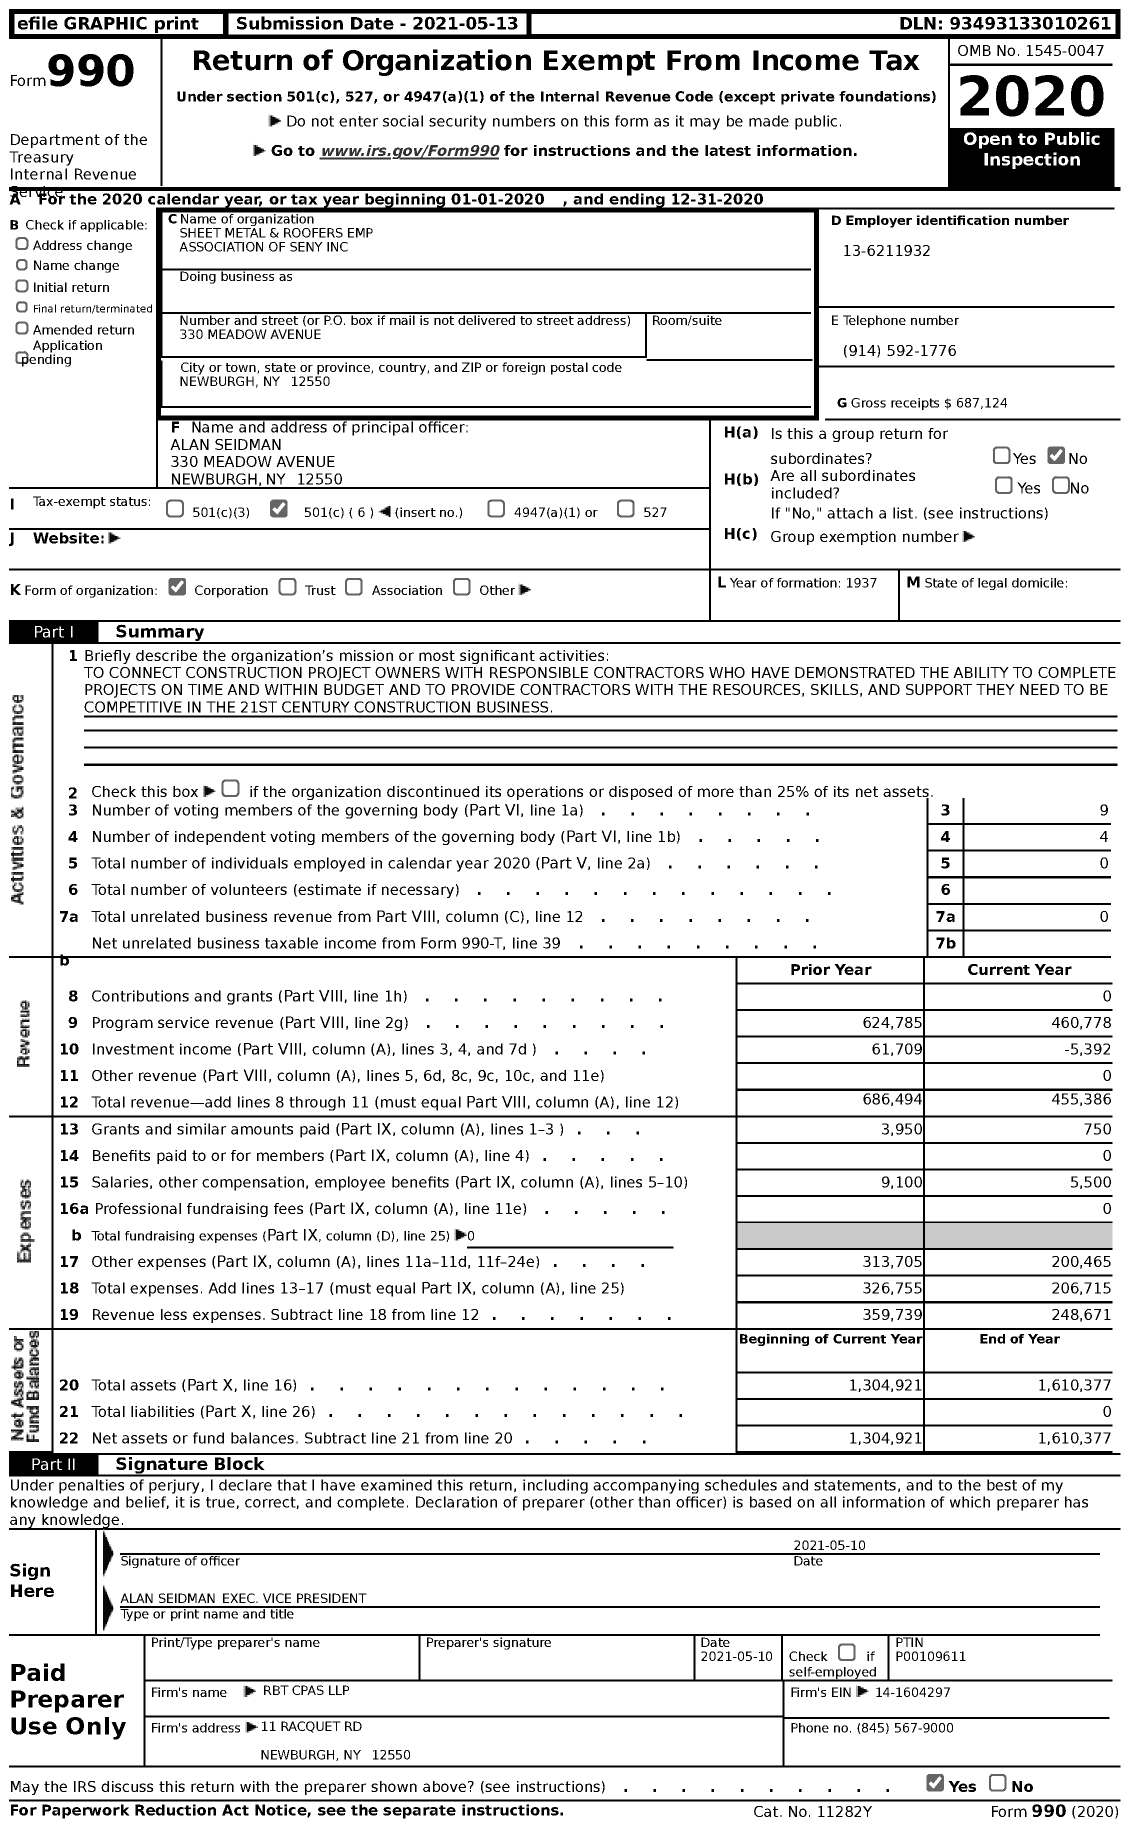 Image of first page of 2020 Form 990 for Sheet Metal and Roofers Emp Association of Seny